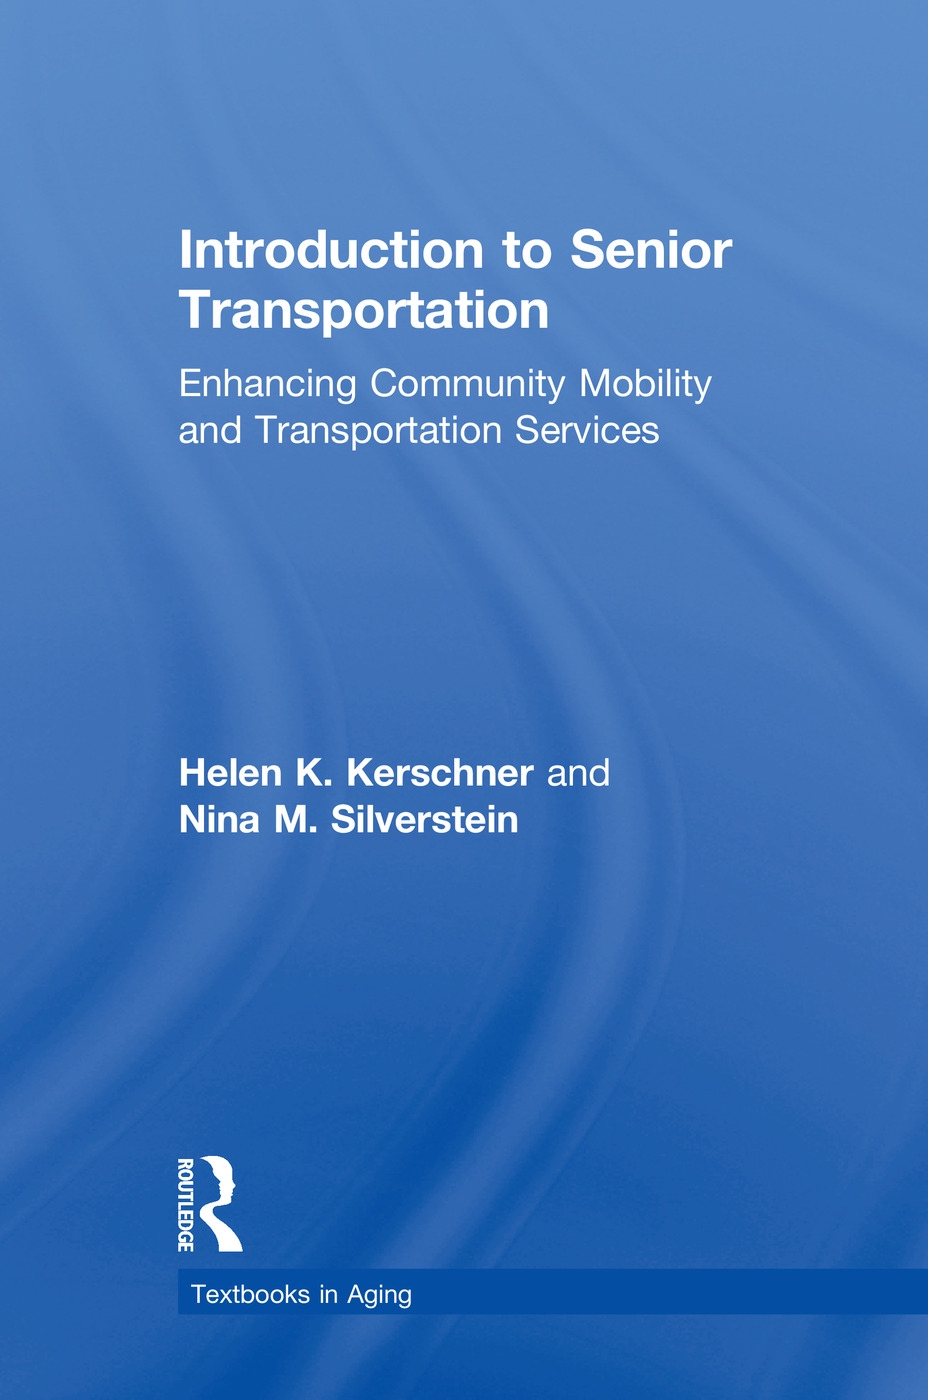 Introduction to Senior Transportation: Enhancing Community Mobility and Transportation Services